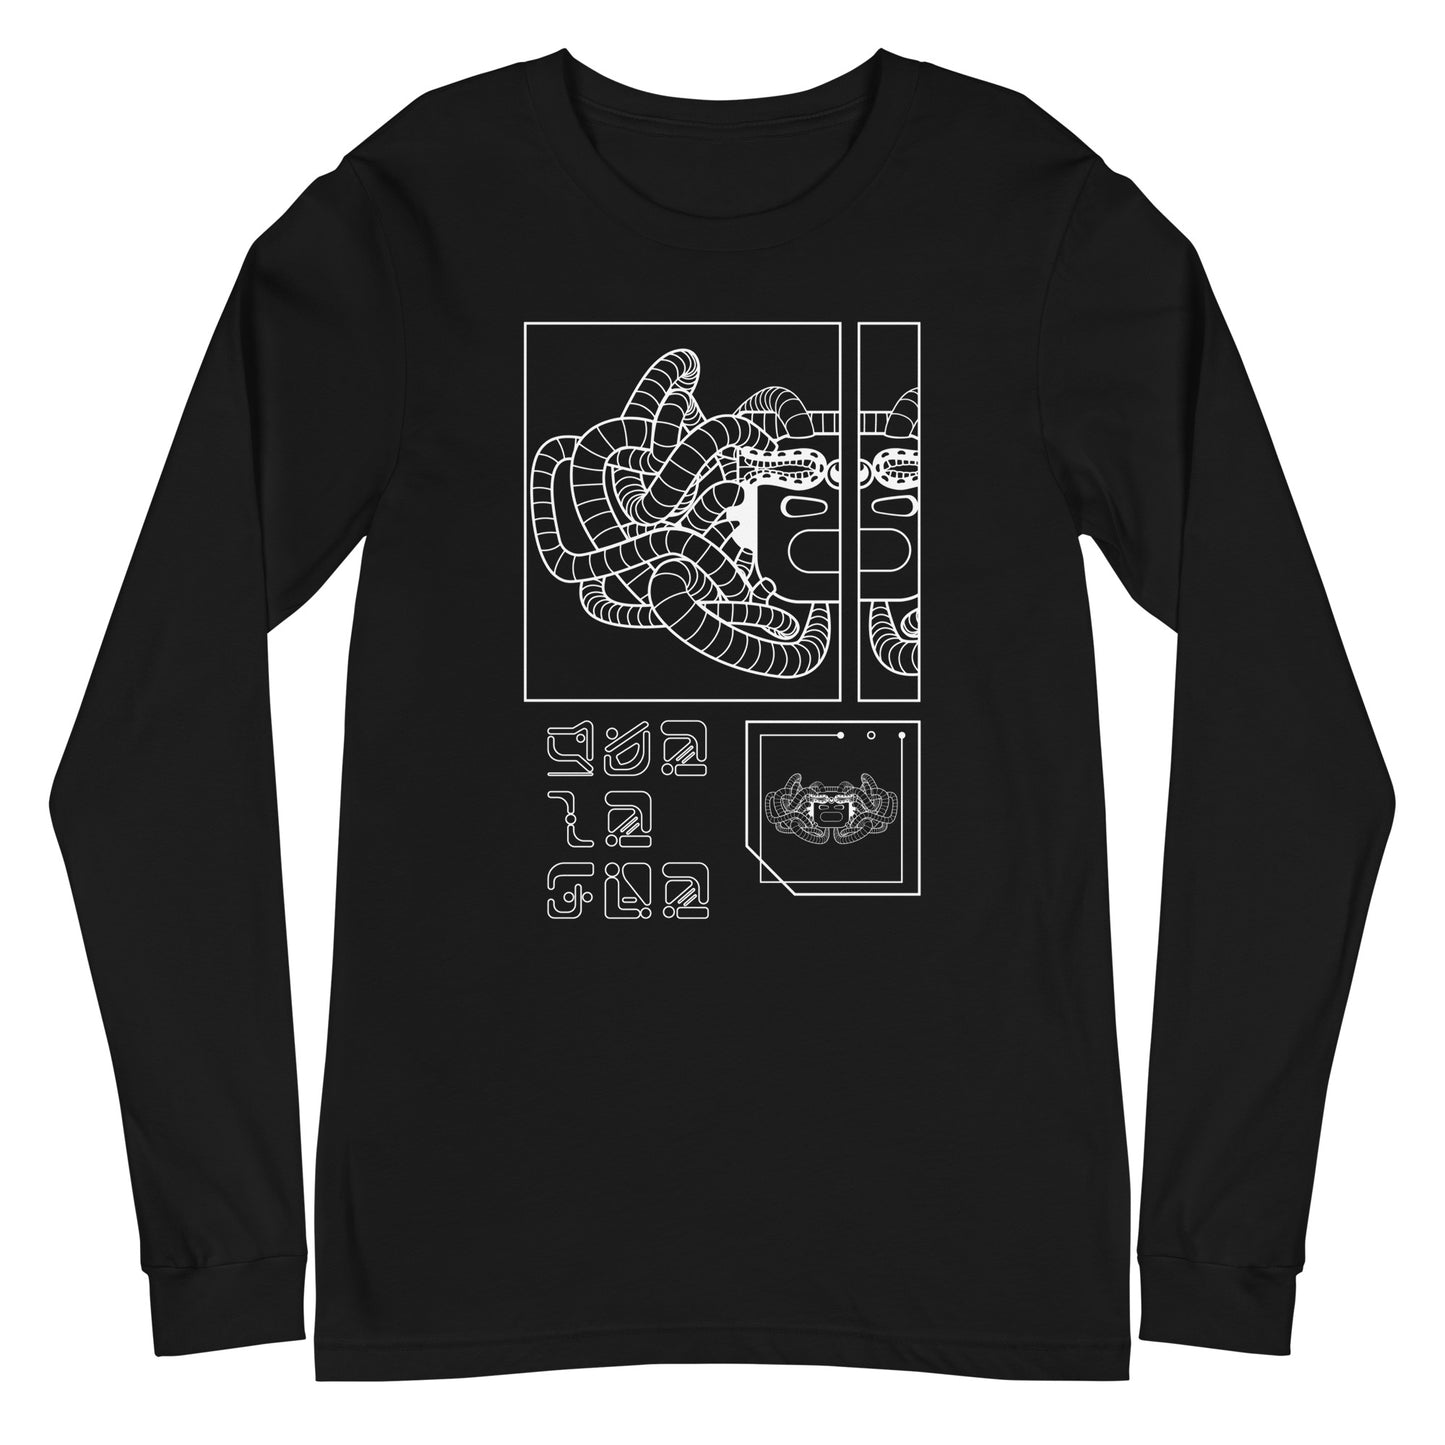 Let It Out - Unisex Long Sleeve Tee